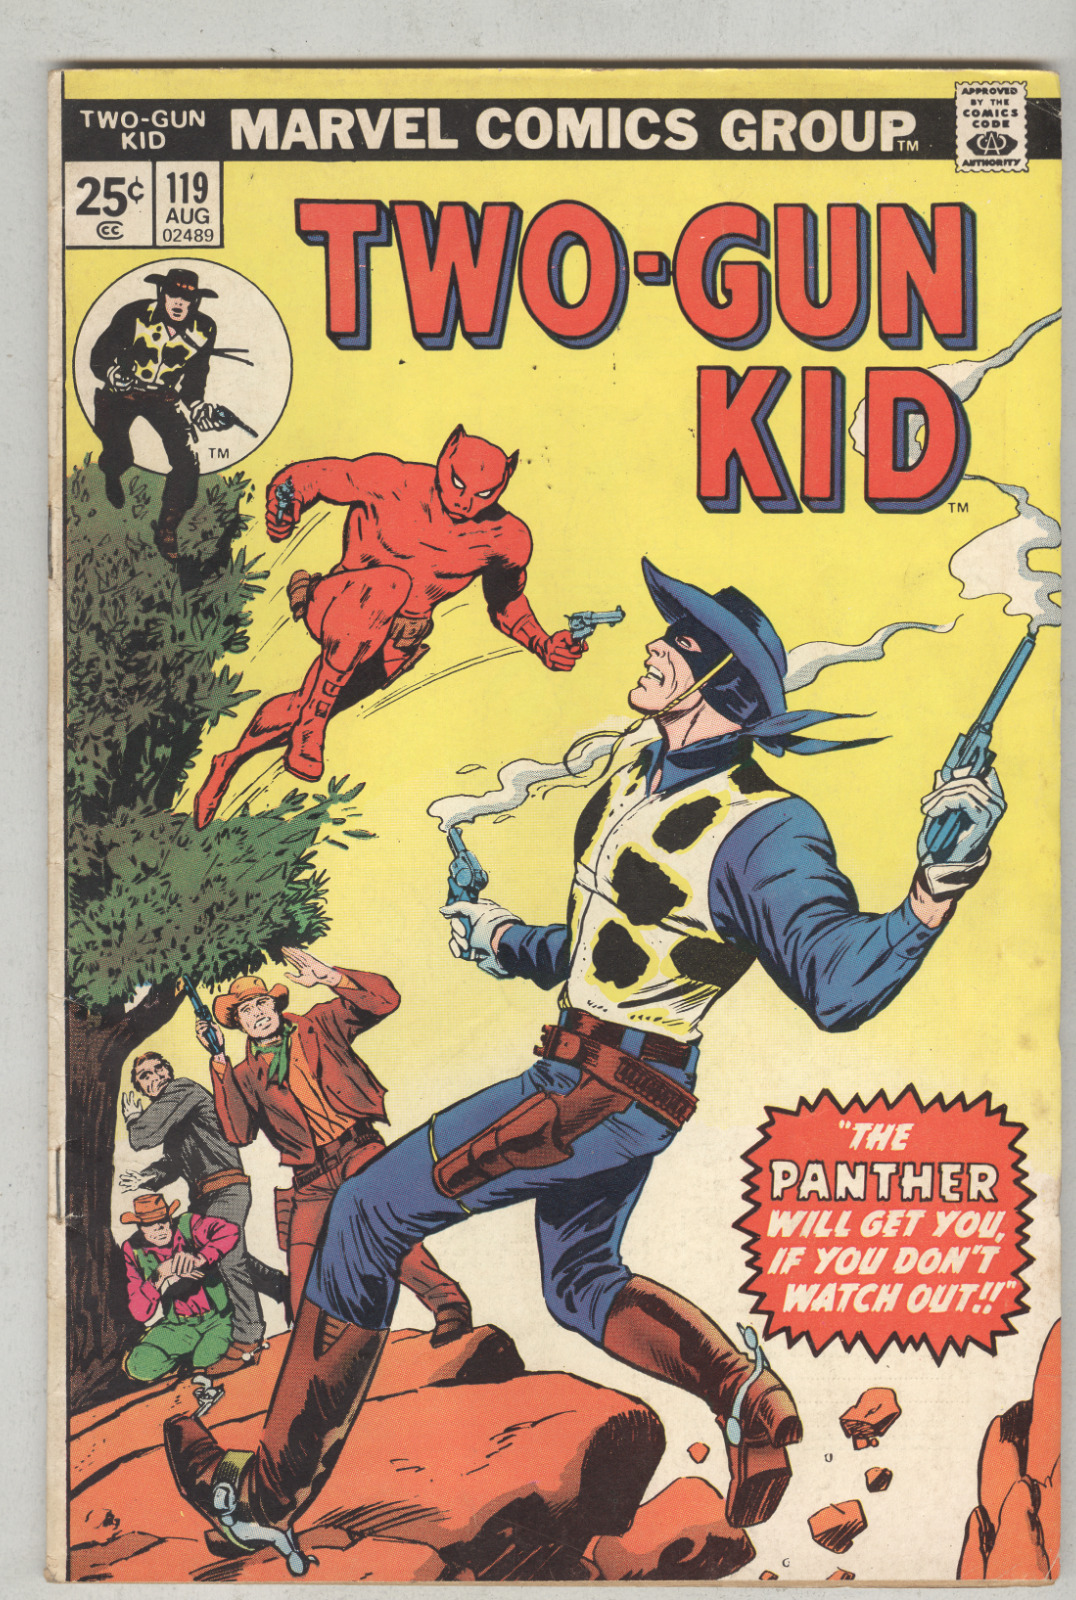 Two-Gun Kid #119 August 1974 VG+ The Panther